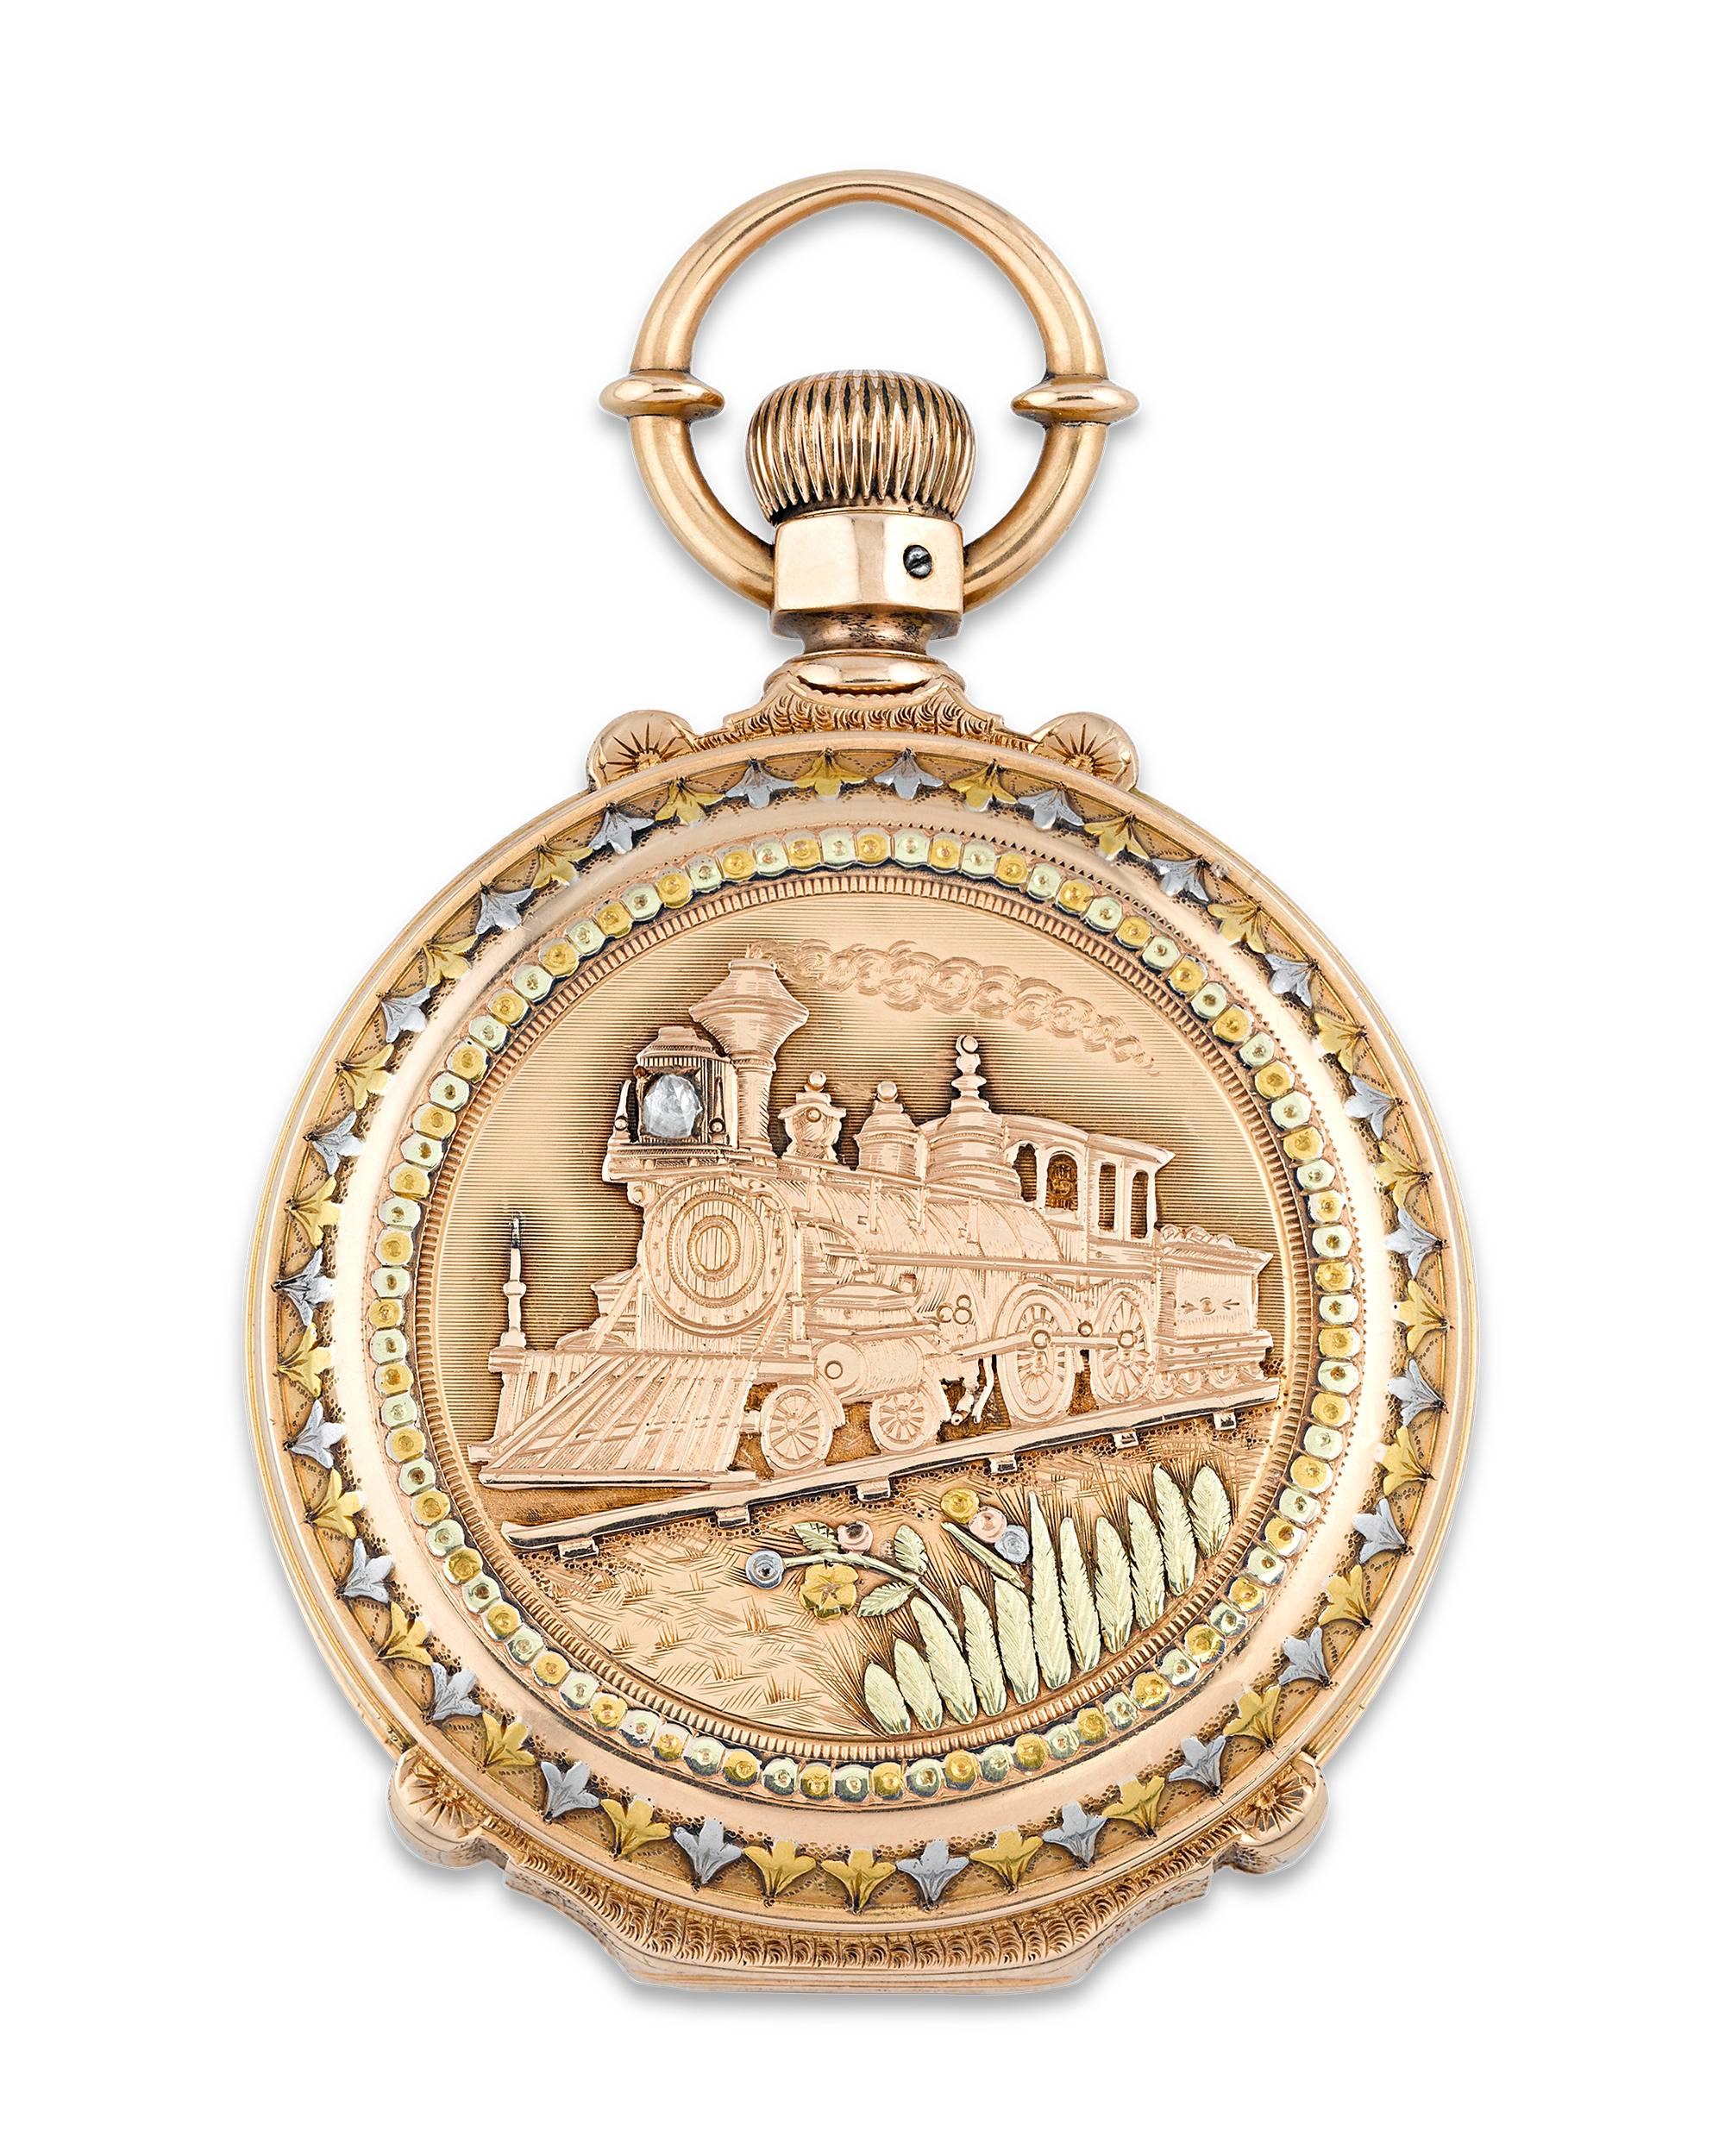 Bringing together precision timekeeping with stunning artistry, this pocket watch by the American Waltham Watch Company is a remarkable work of horological craftsmanship. Railroad watches such as this are renowned for their accuracy, as standardized